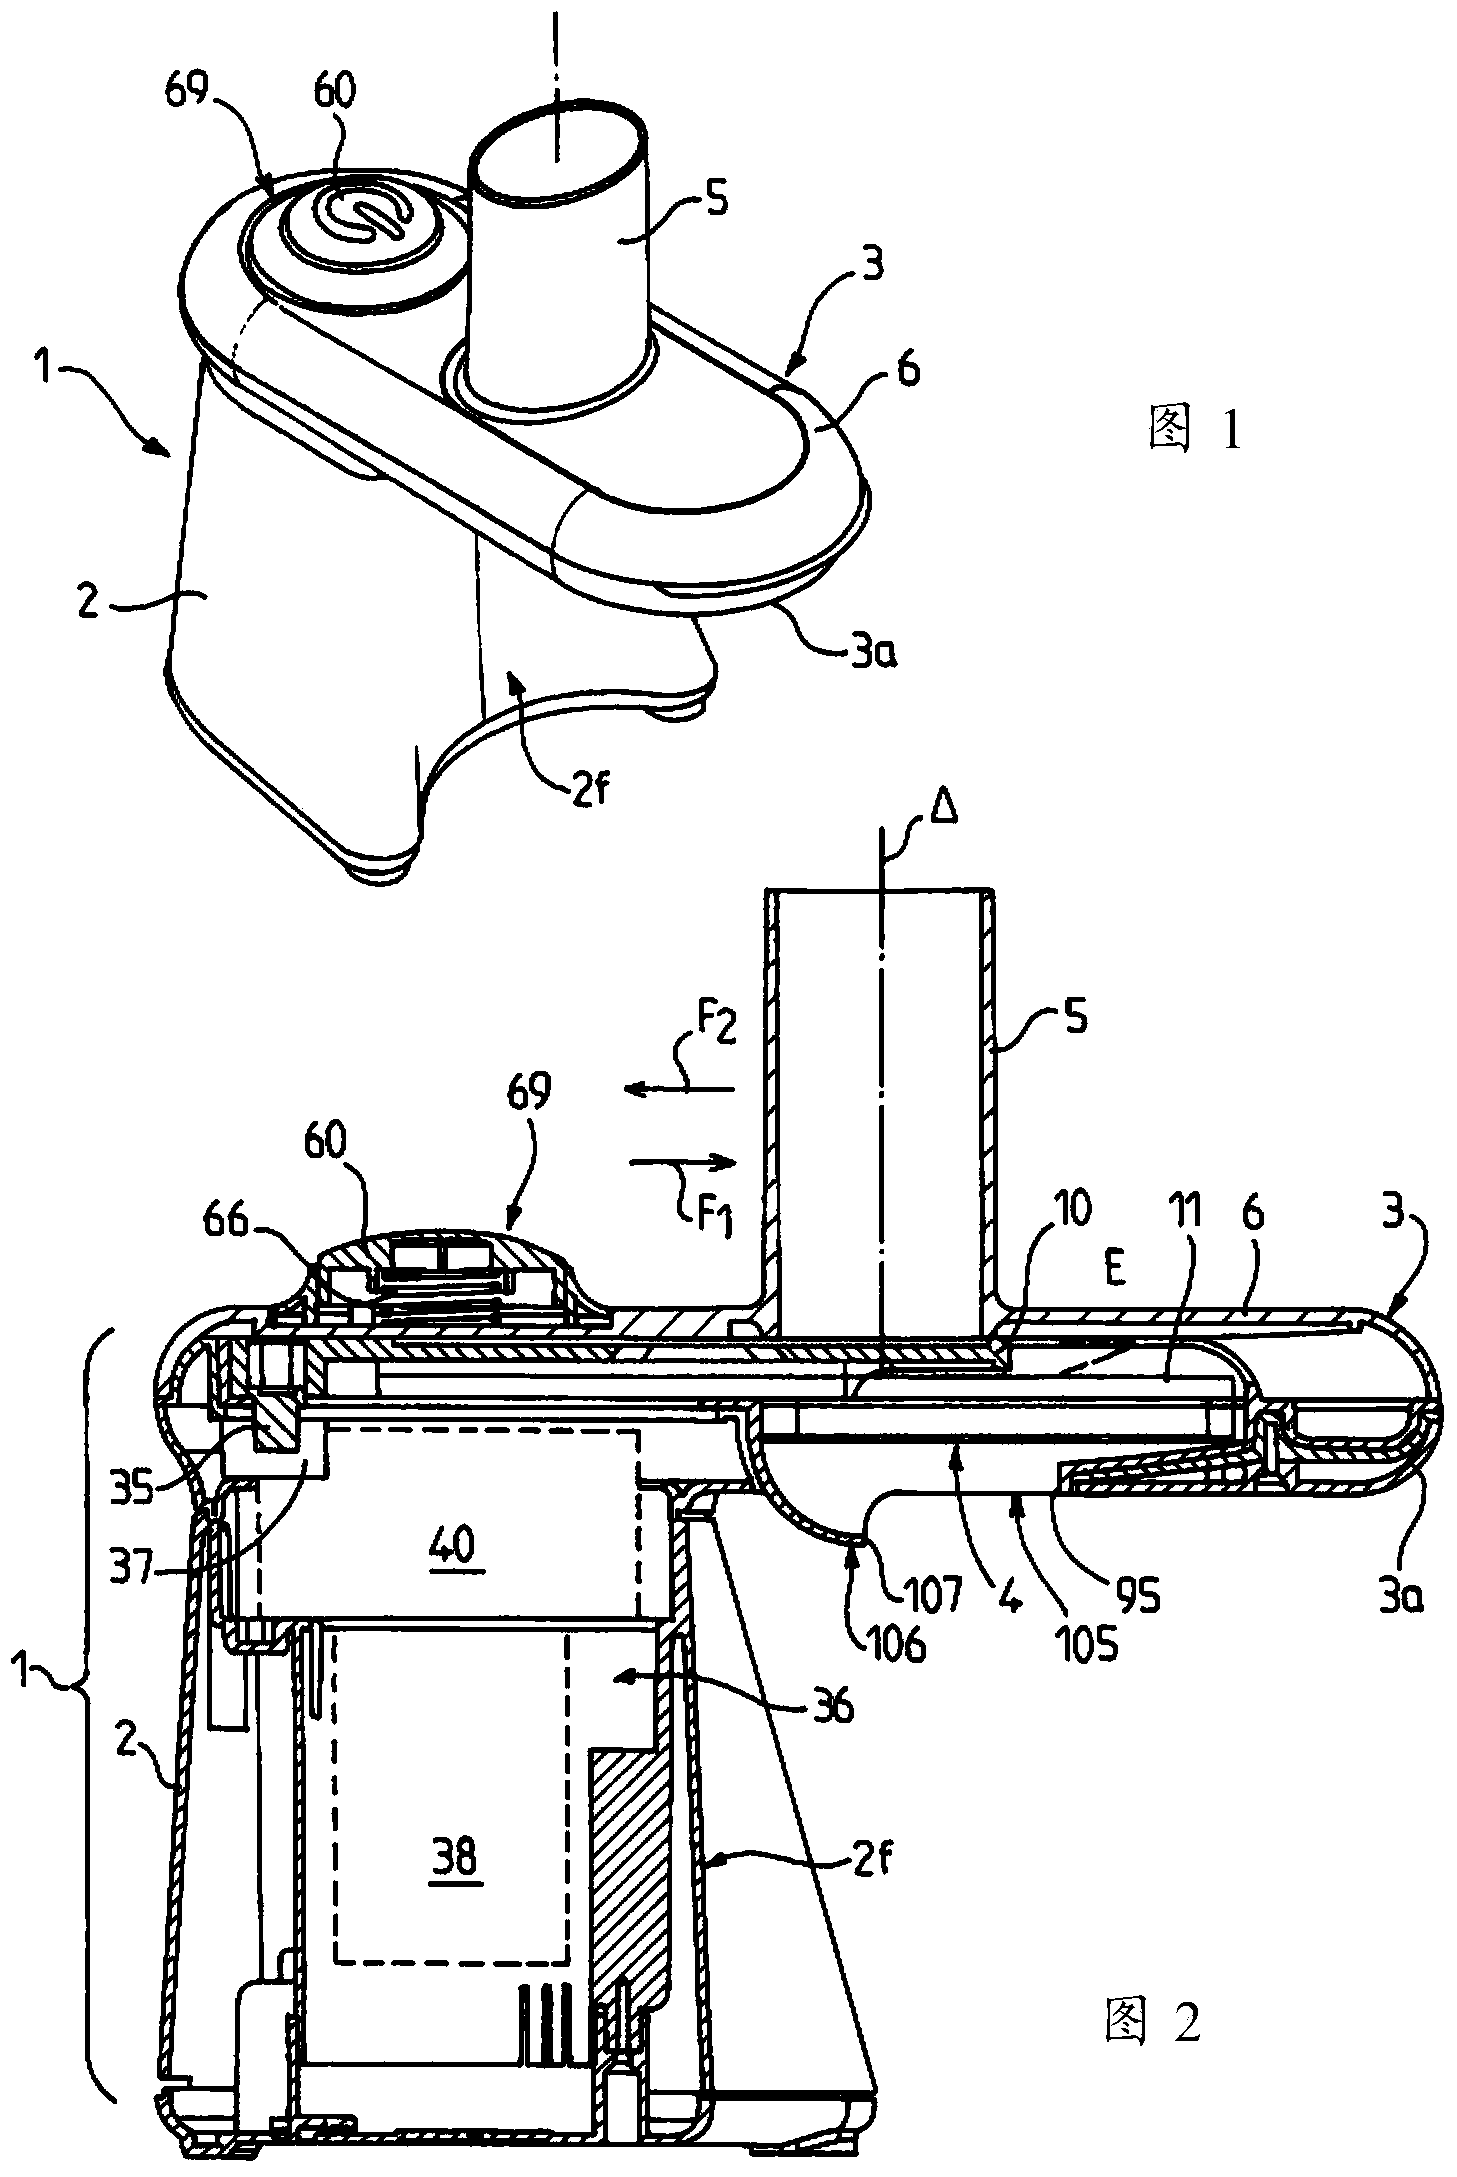 Food-preparation appliance having a mounting for storing removable work accessories